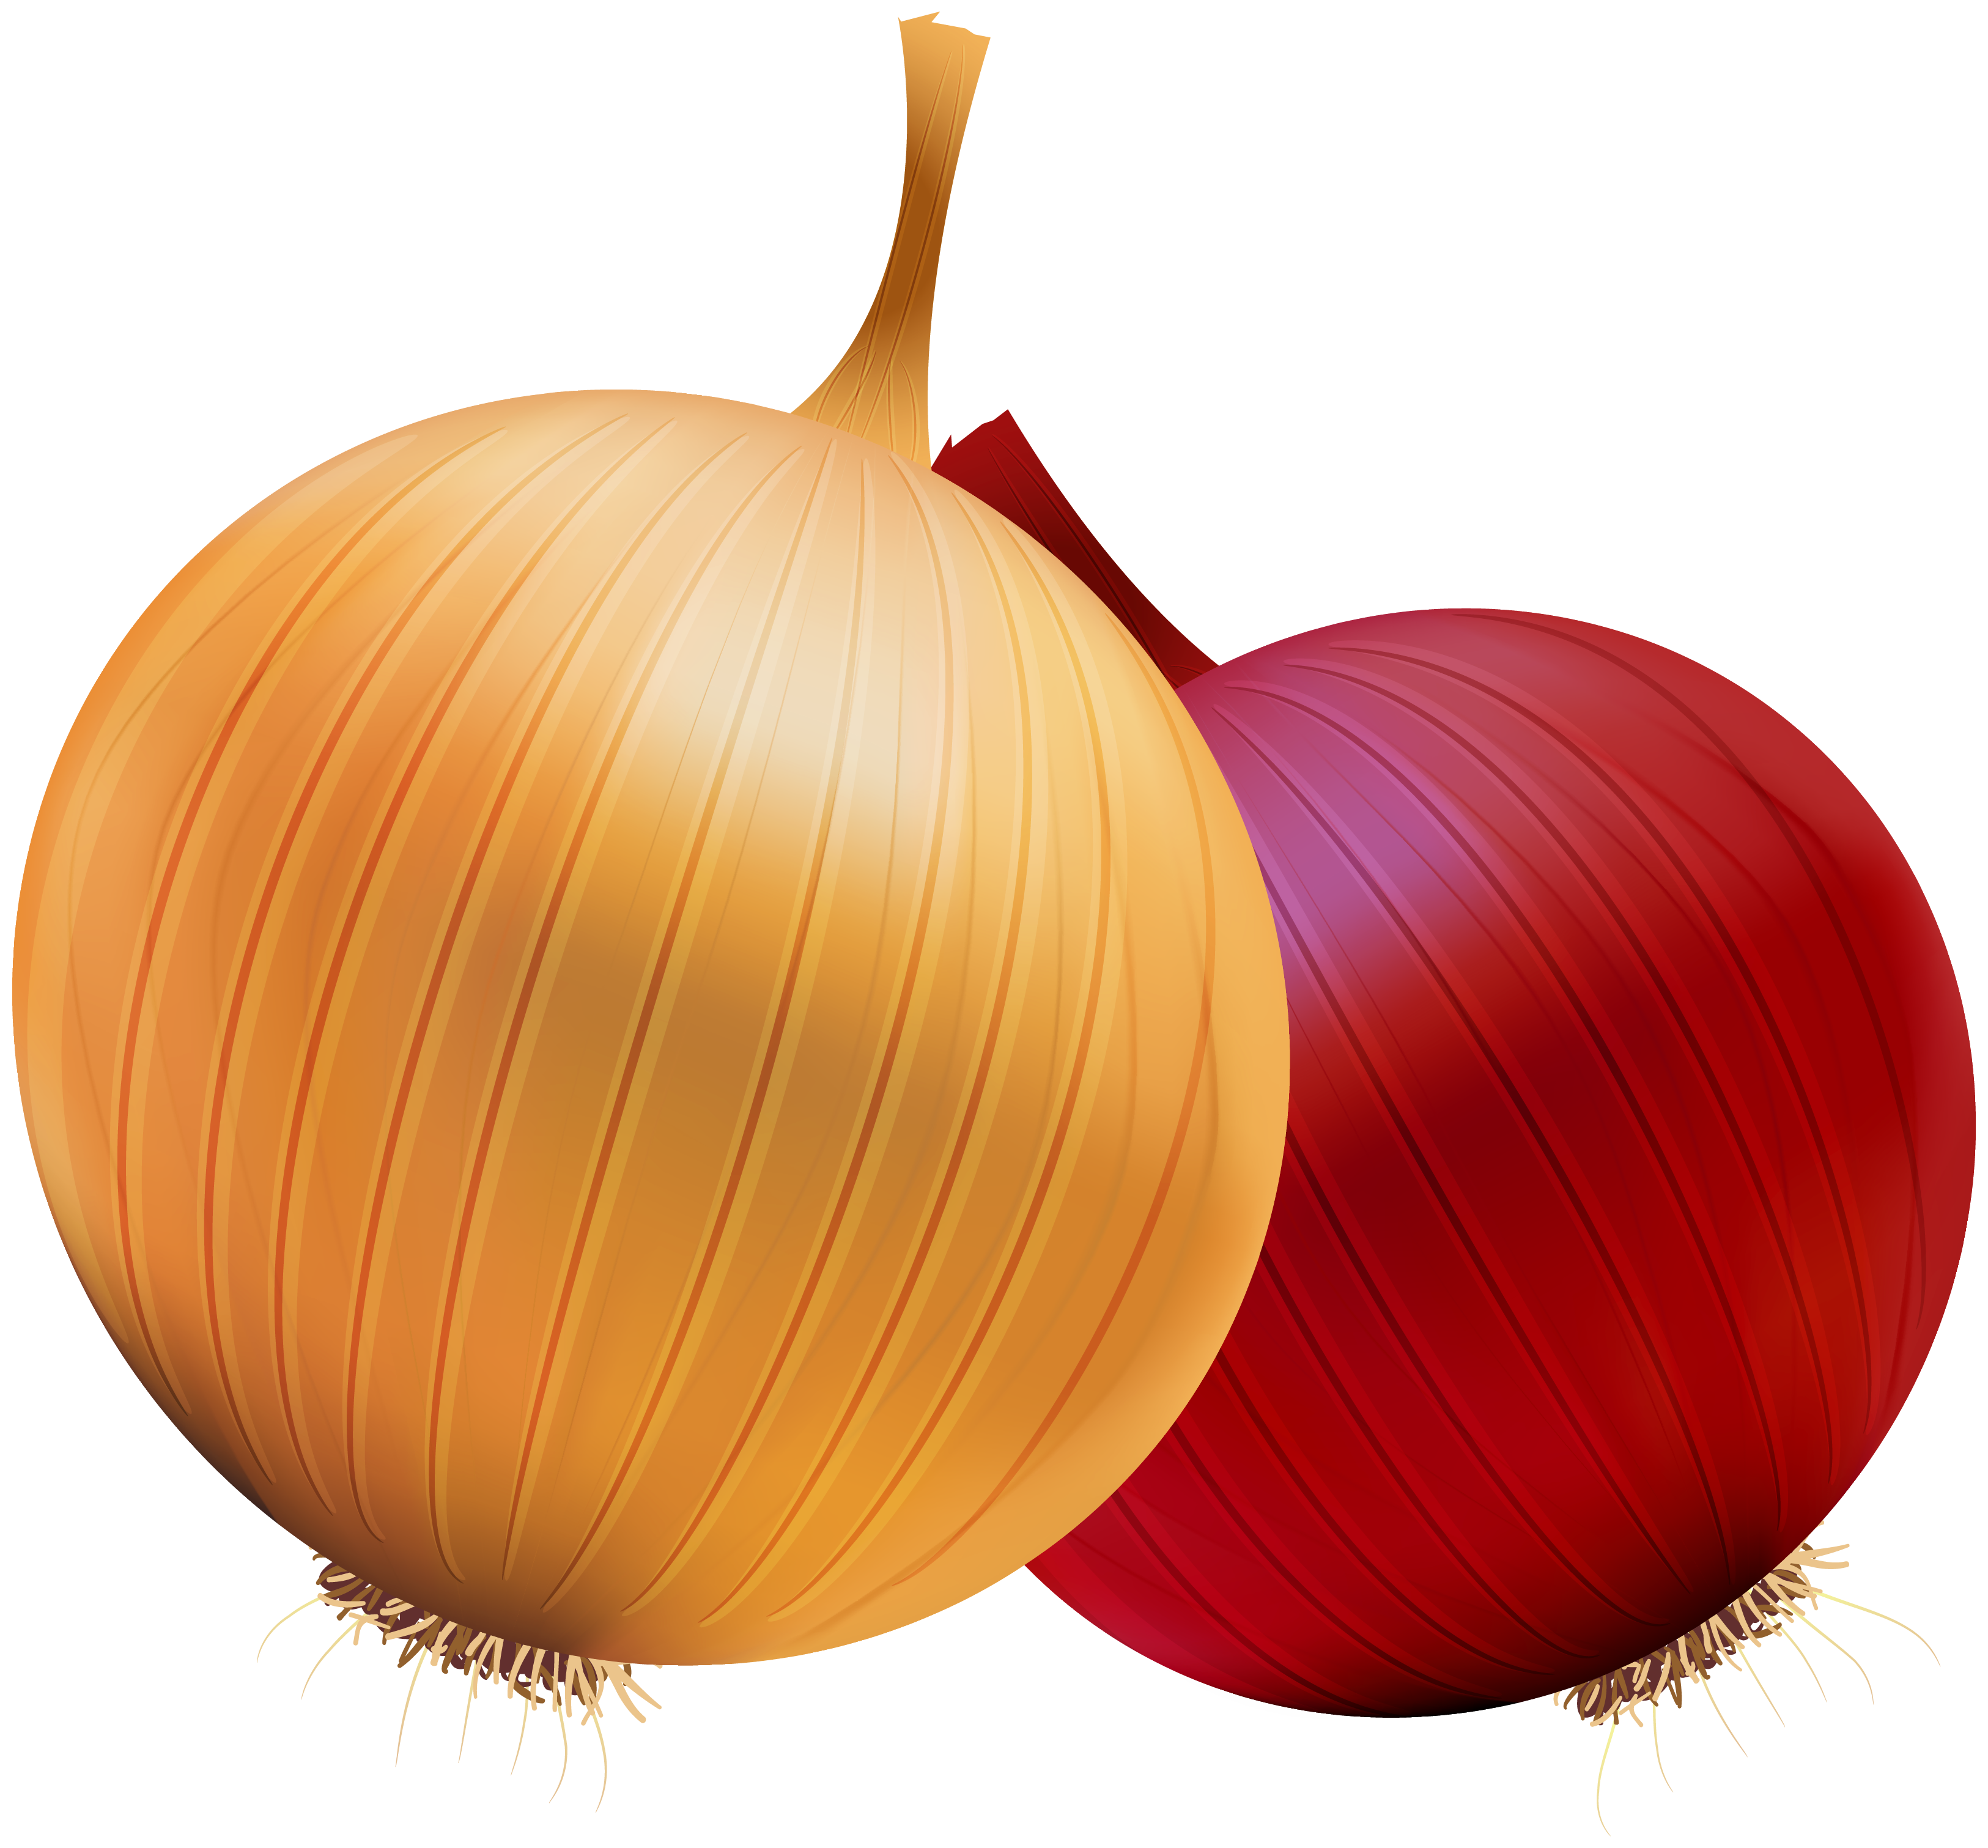 Onion and Red Onion PNG Clipart.